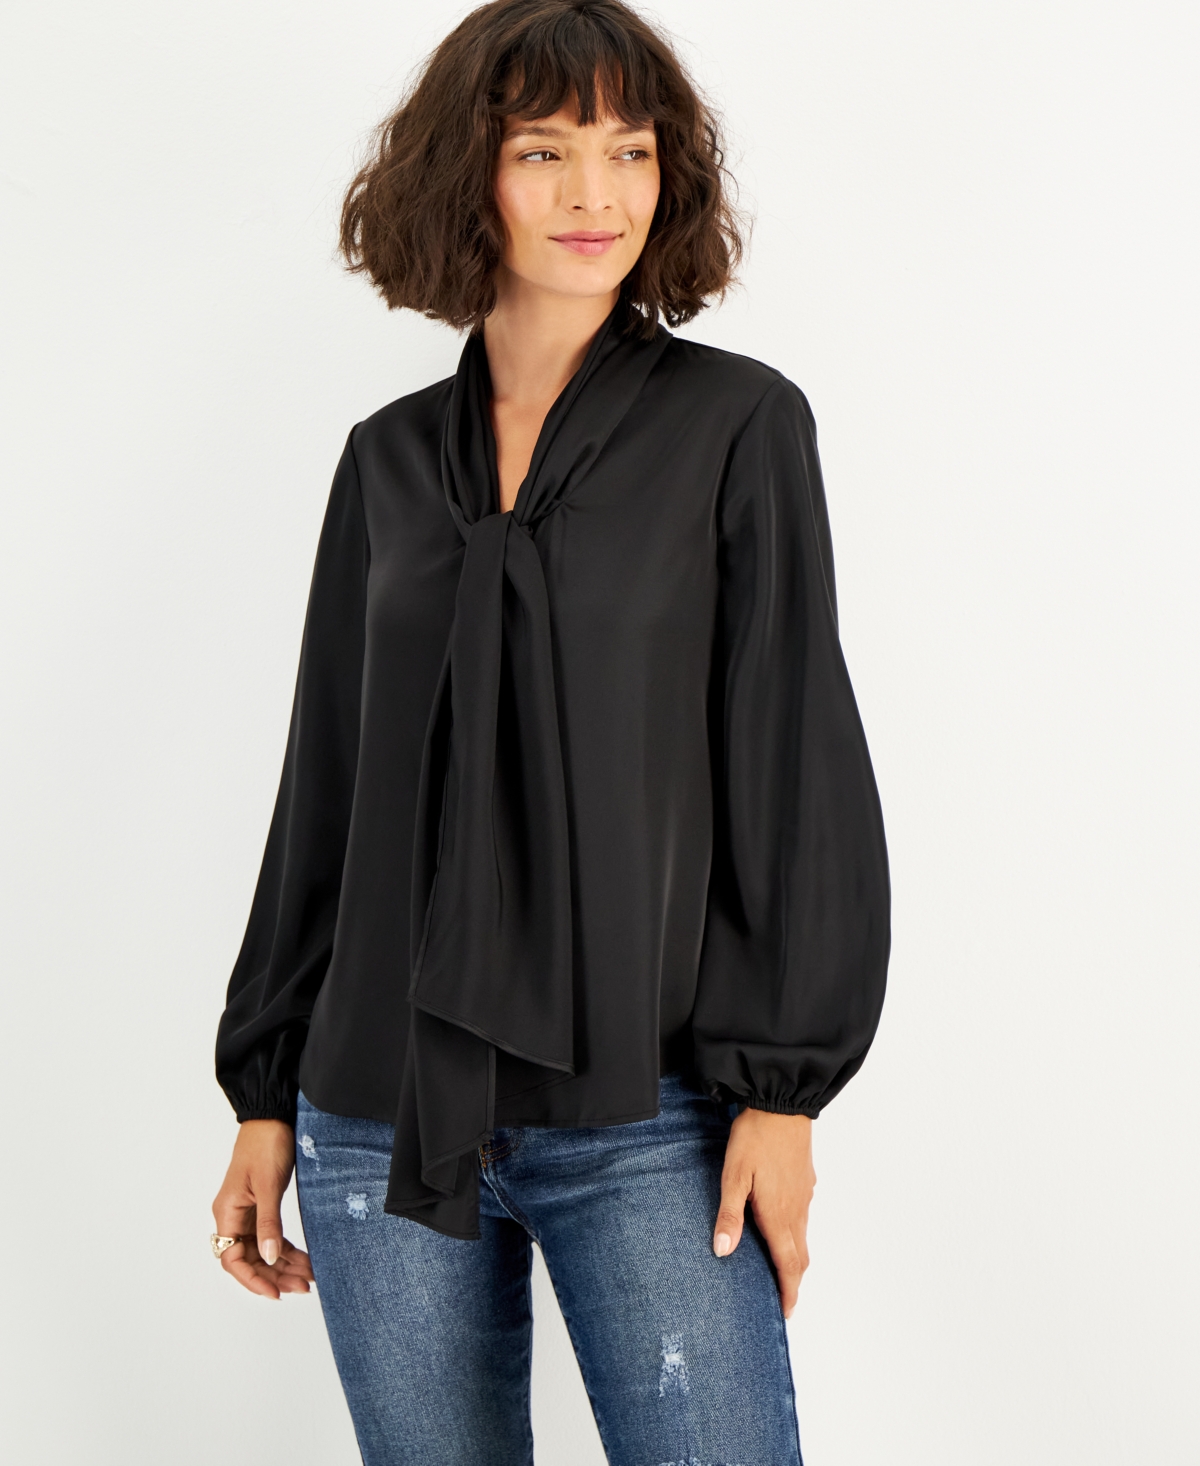 Women's Bow-Tie Long-Sleeve Blouse, Created for Macy's - Black